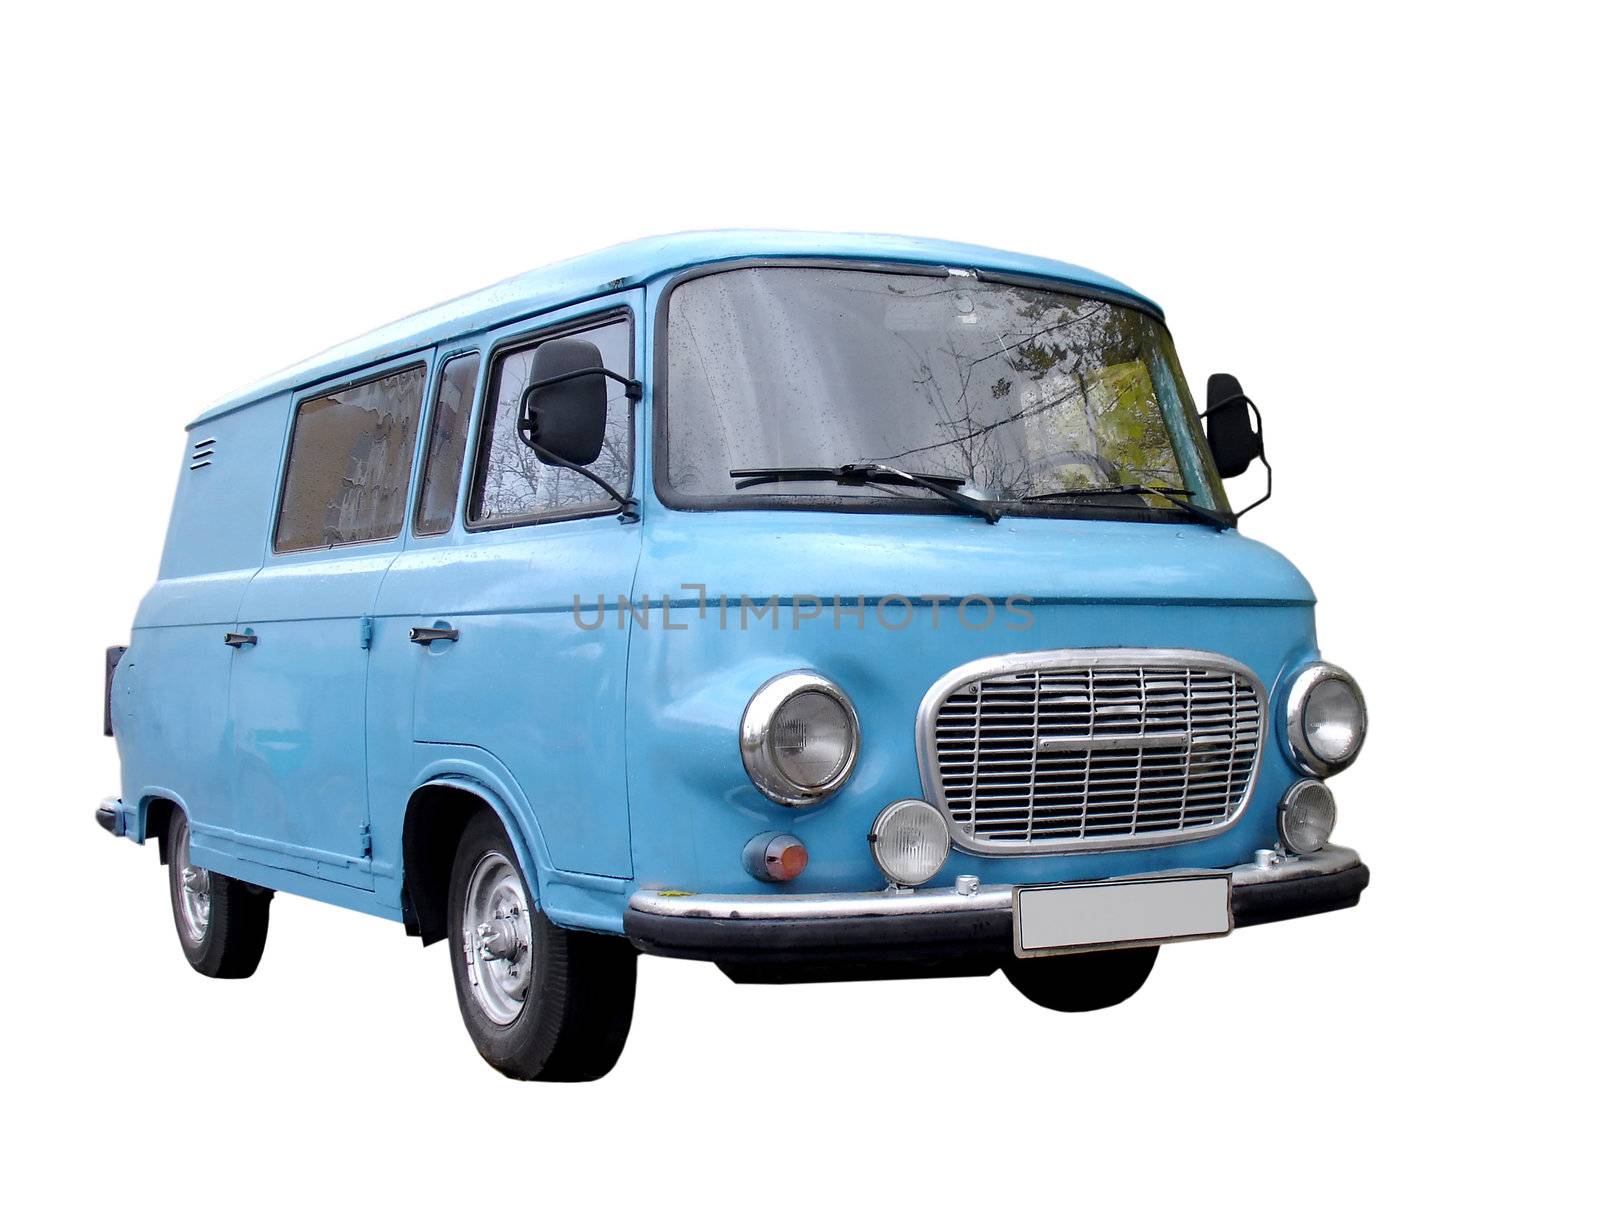 Isolated blue vintage minivan on a white background